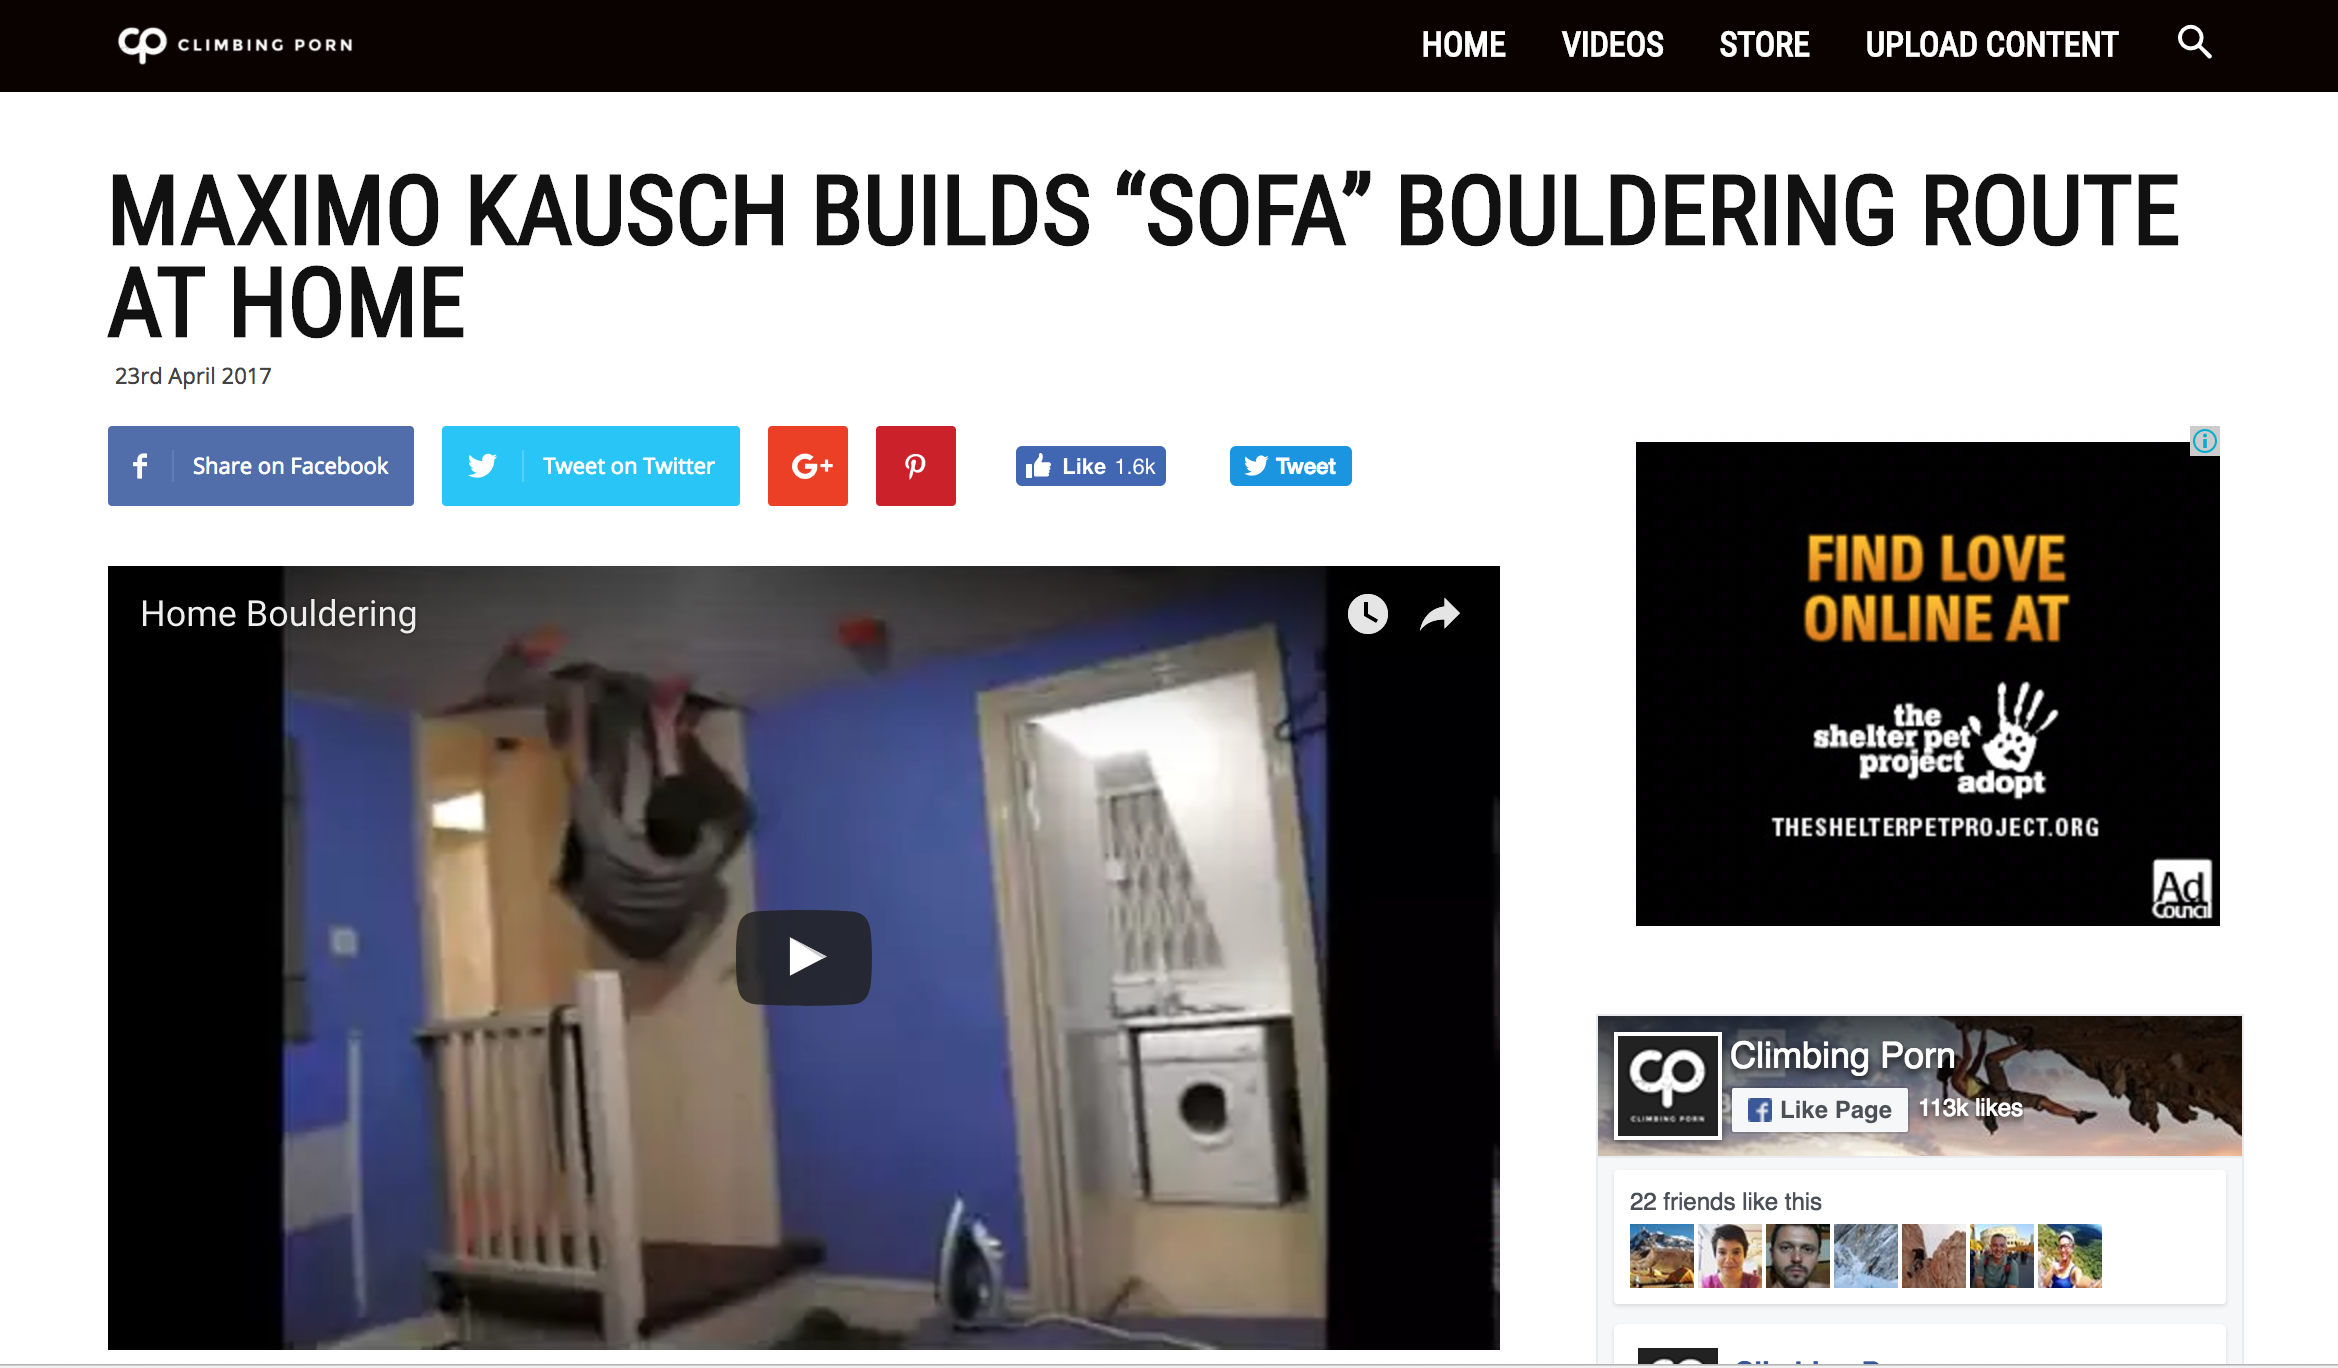 maximo-kausch-builds-sofa-bouldering-route-at-home